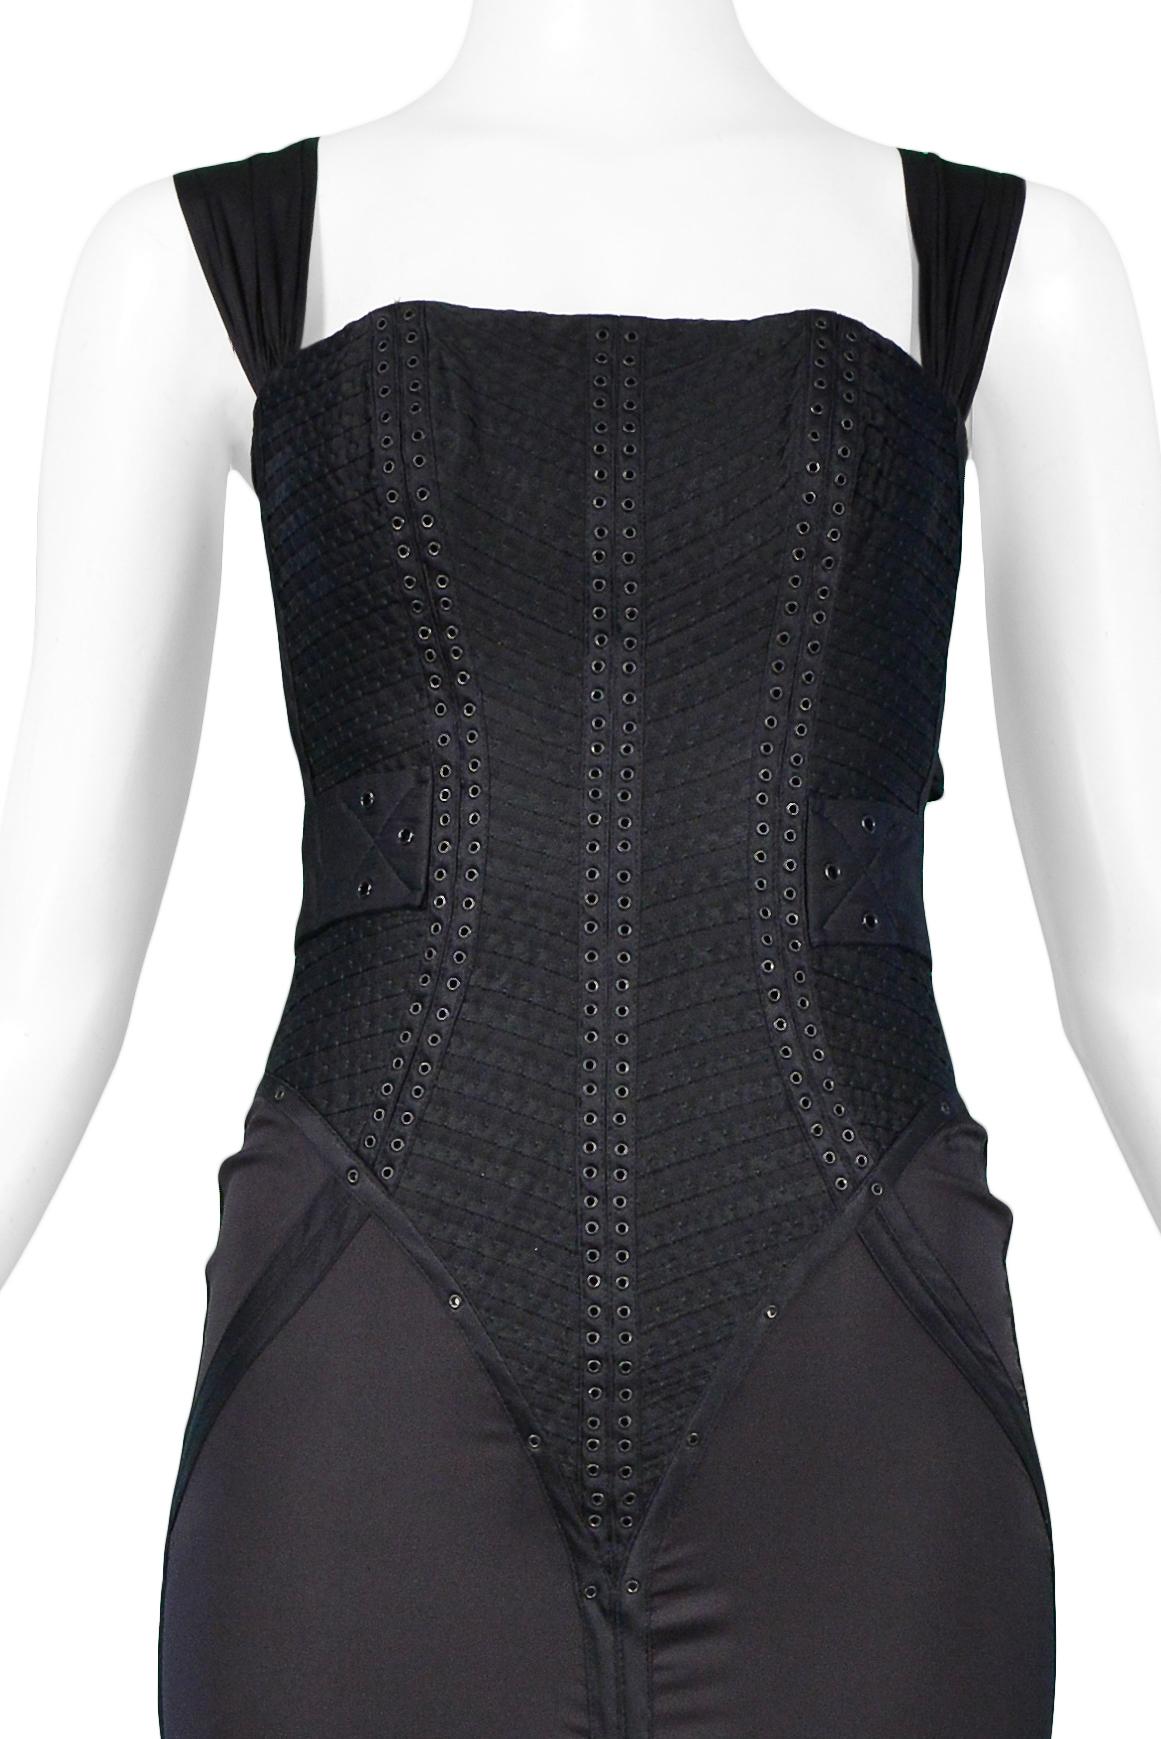 We are excited to offer this stunning vintage black Tom Ford for Gucci silk corset gown featuring a heavily pleated corset bodice with grommets, criss-cross back straps, pleated insets, grommet trim, gown length with train, center back zipper, and